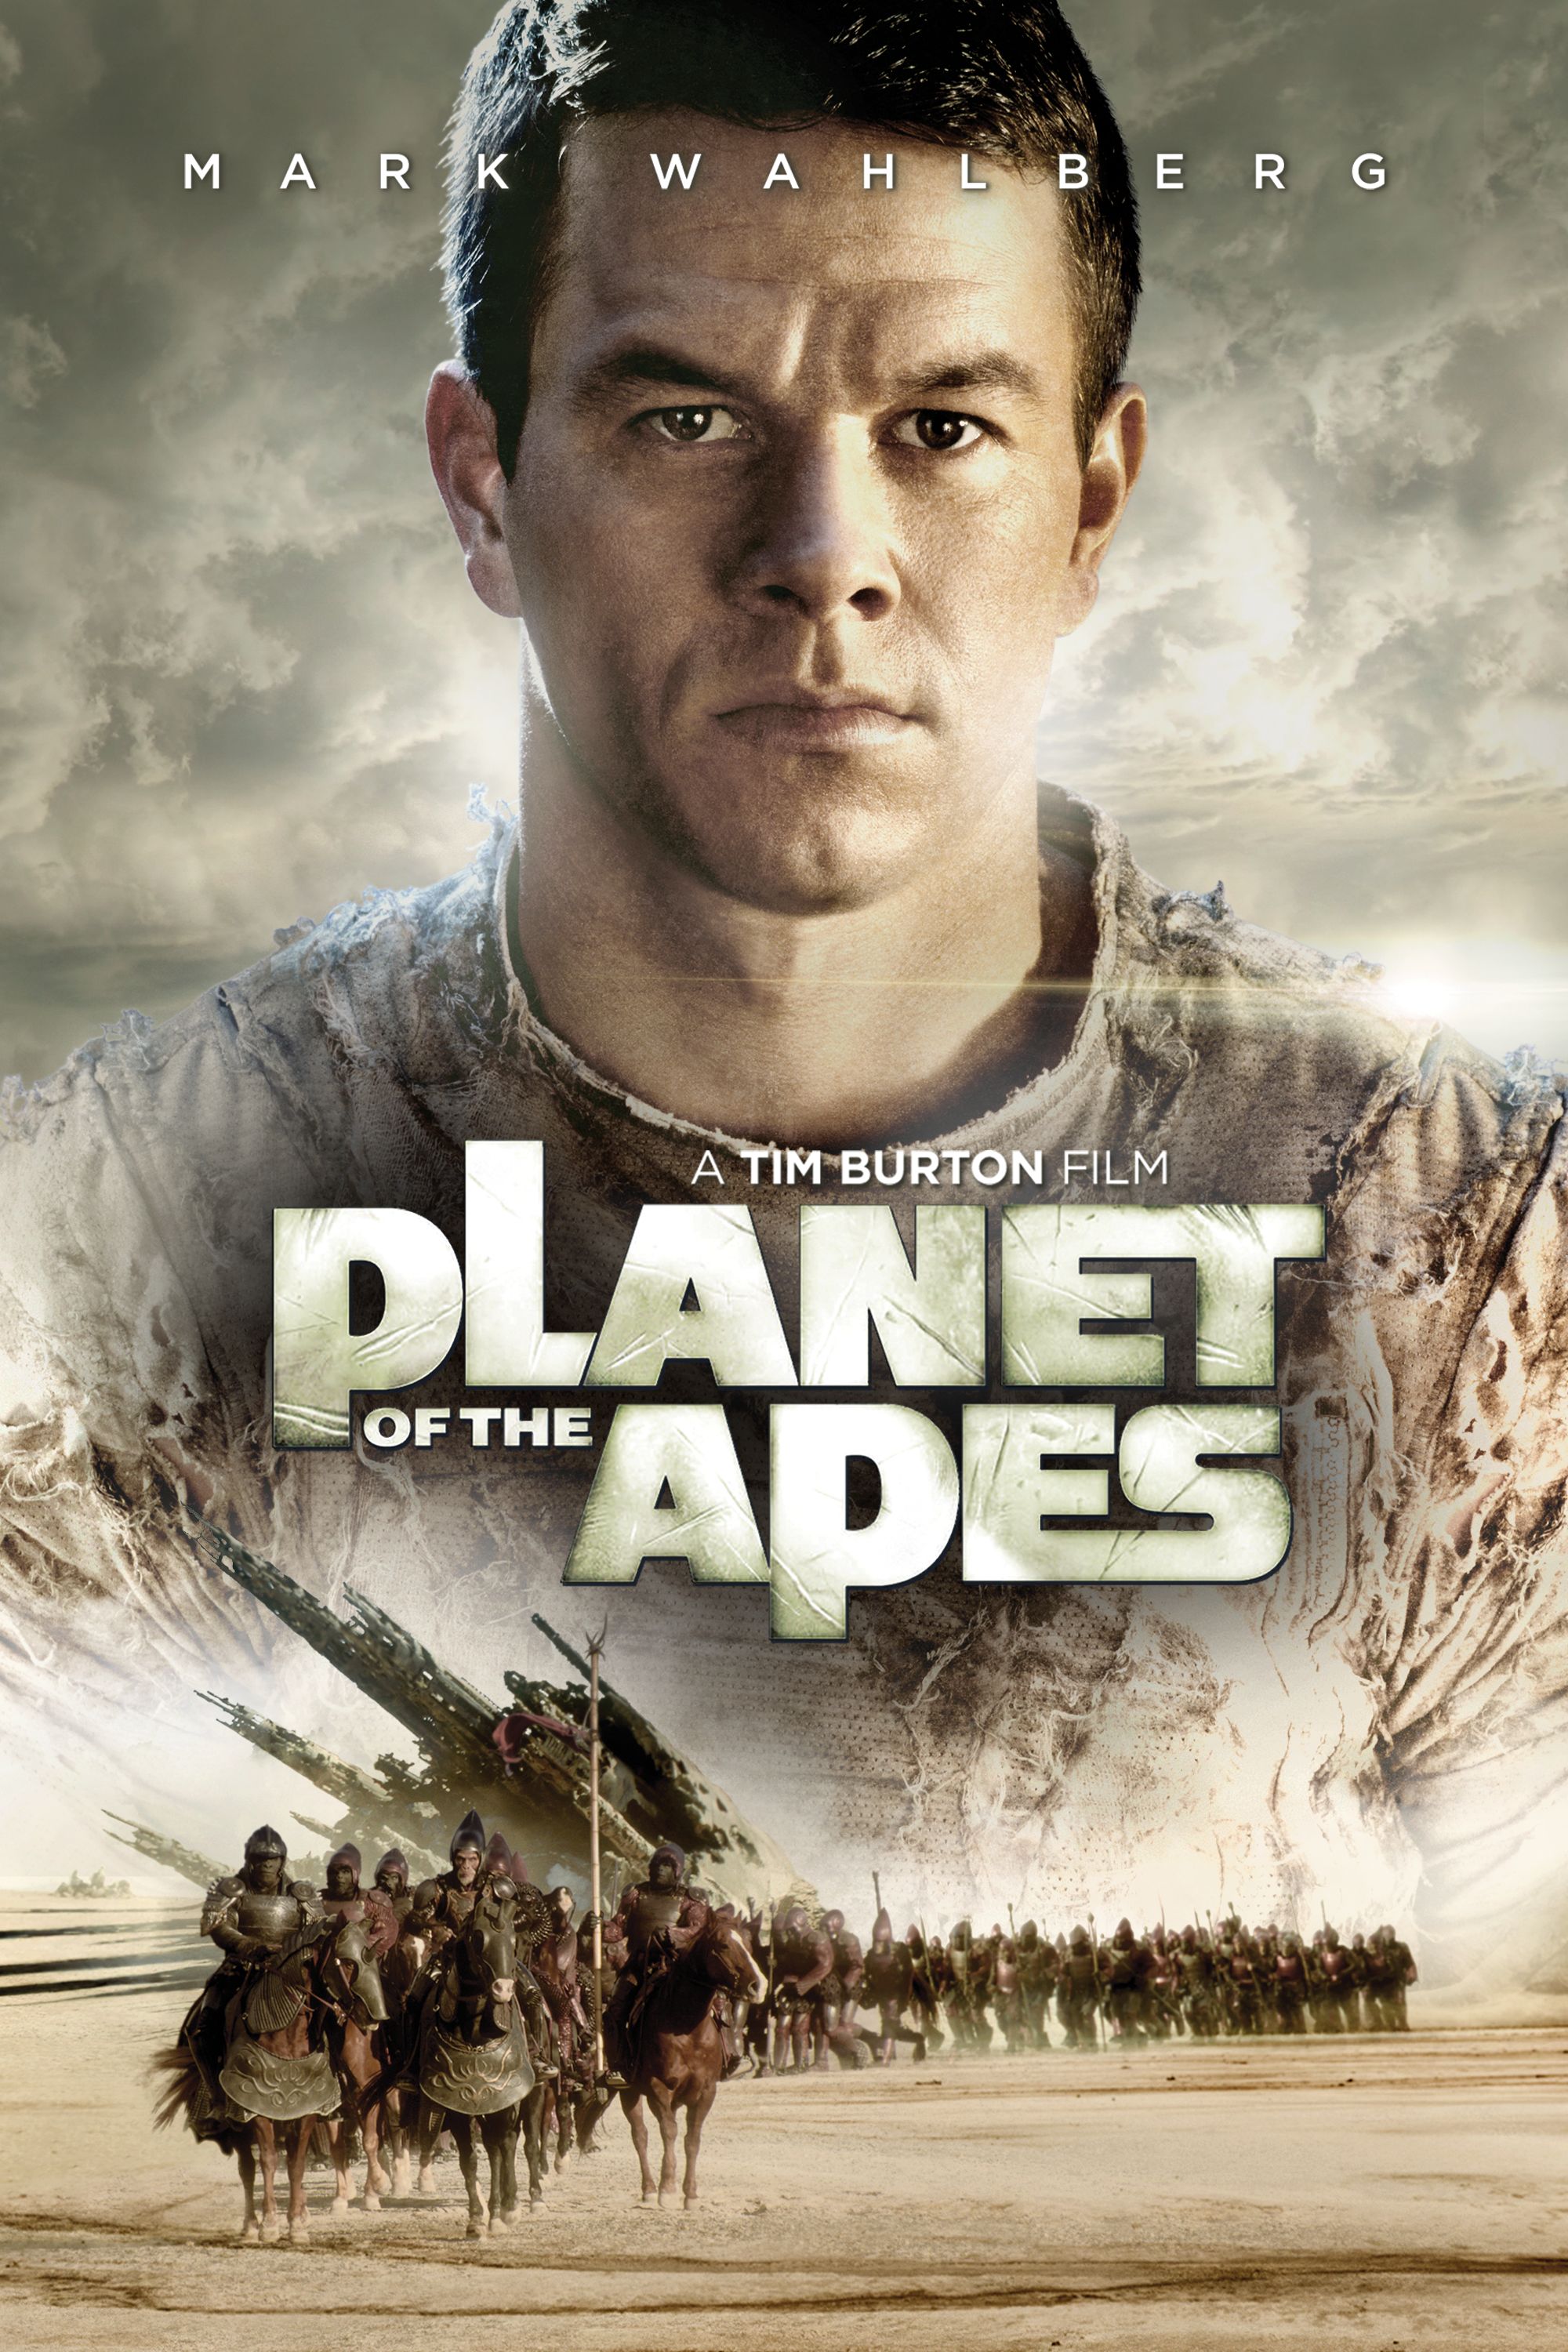 Planet of the apes free online